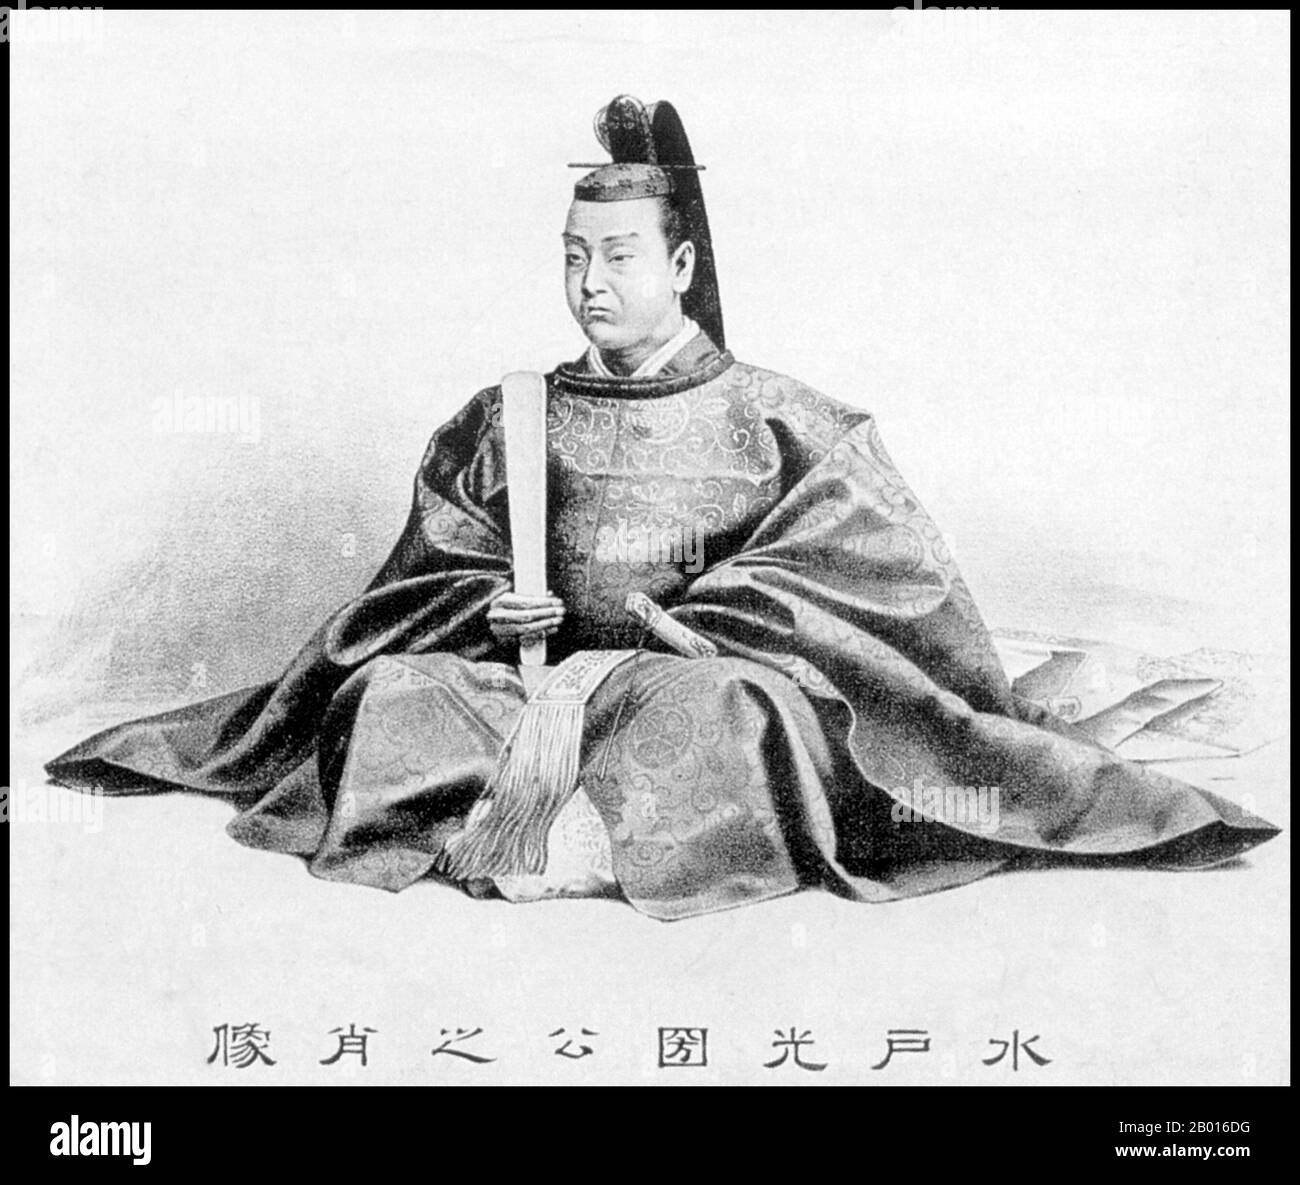 Japan: Tokugawa Mitsukini (11 July 1628 - 14 January 1701), Daimyo of Mito (r. 1661-1691). Illustration, c. late 19th century.  Tokugawa Mitsukuni, also known as Mito Komon and born Chomaru, was an important daimyo known for his influence in the politics of the early Edo period. The third son of Tokugawa Yorifusa (who in turn was the eleventh son of Shogun Tokugawa Ieyasu), Mitsukuni succeeded him to become the second daimyo of the Mito Domain. He was responsible for assembling scholars to compile a concise record of Japanese history, which was called 'Dai Nihonshi'. He is venerated as a kami. Stock Photo